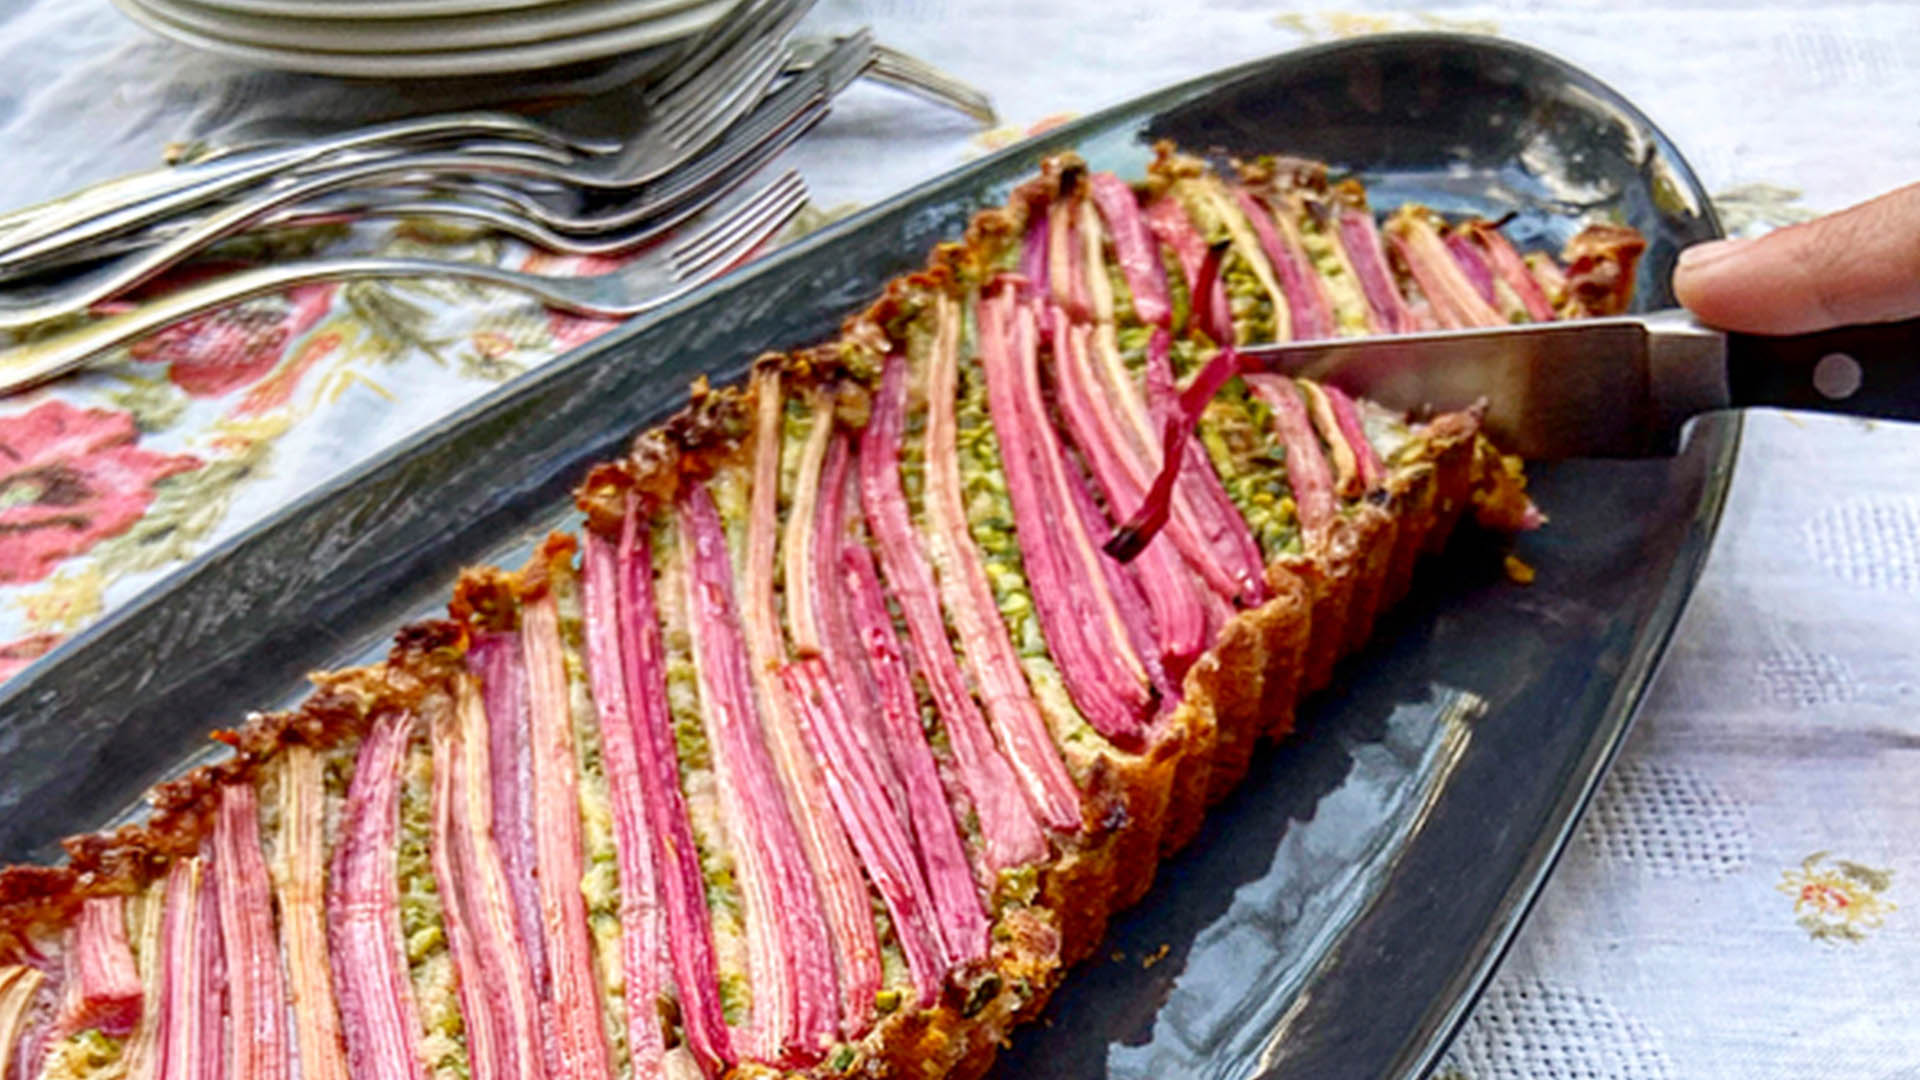 Rhubarb pistachio cake on black long oval shaped serving plate with knife cutting into it.